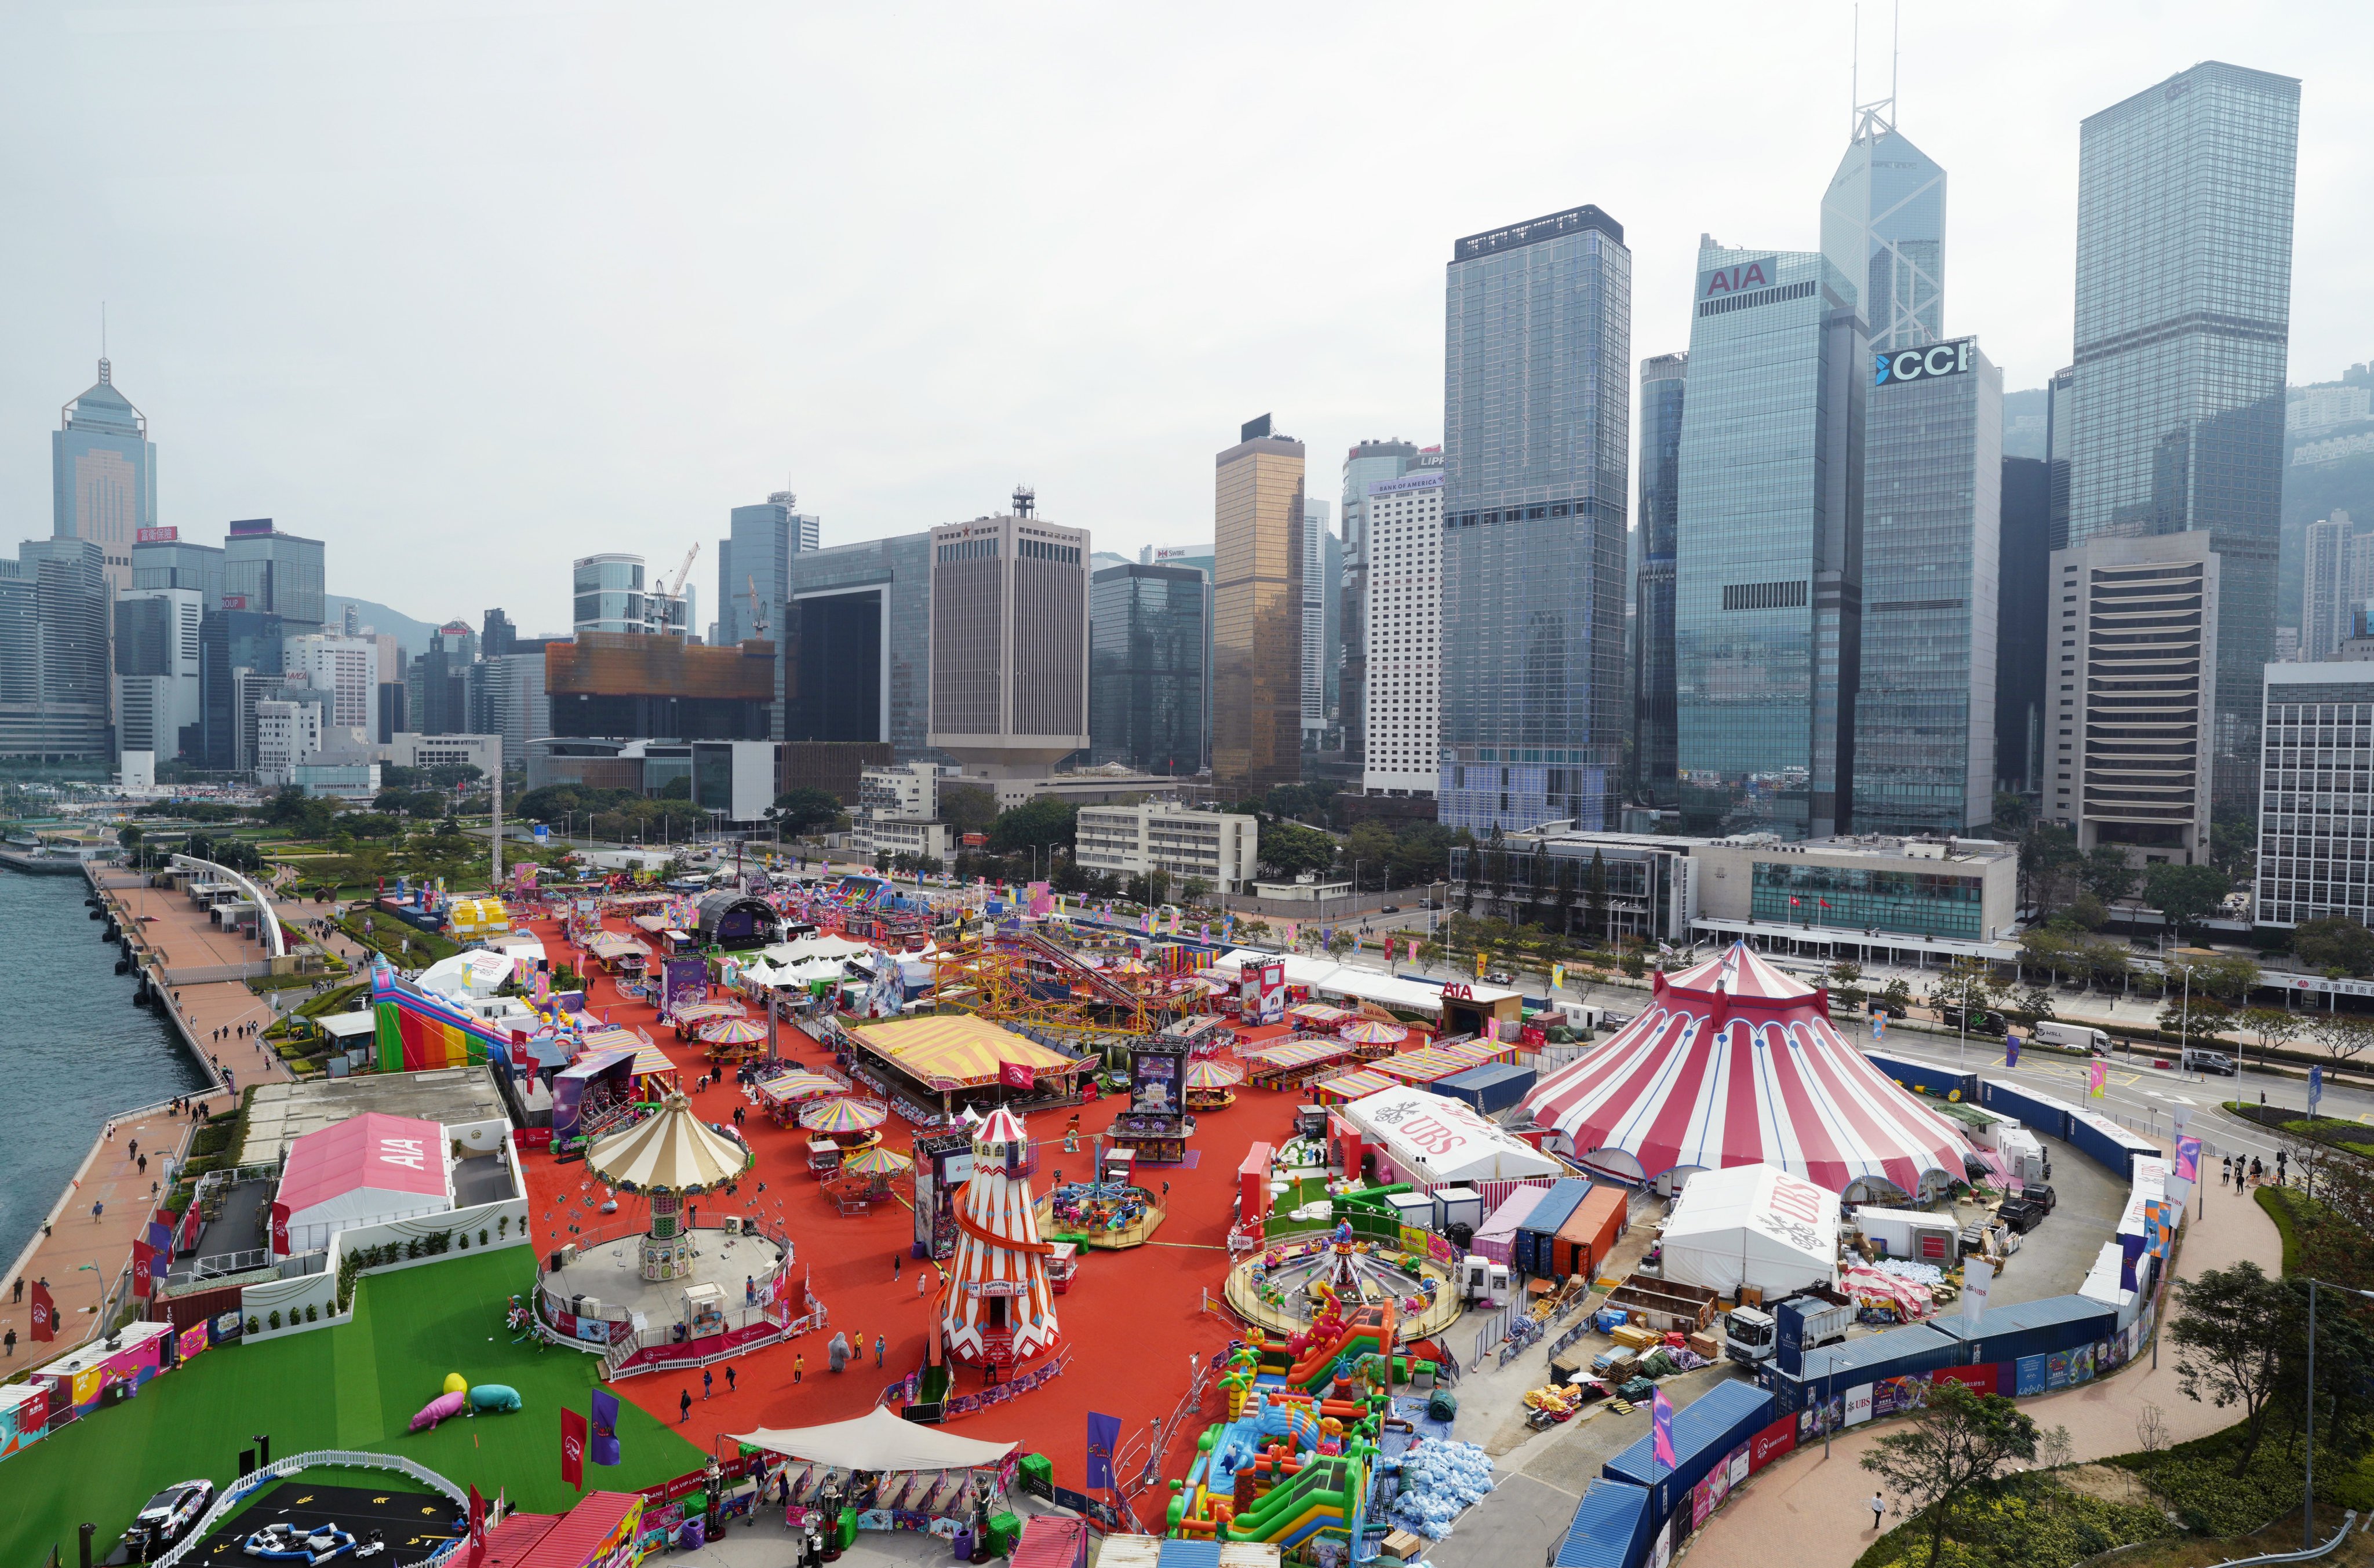 The organiser of One Love Asia Festival has announced a venue change from Central Harbourfront Event Space (pictured) to AsiaWorld-Expo. Photo: Elson Li